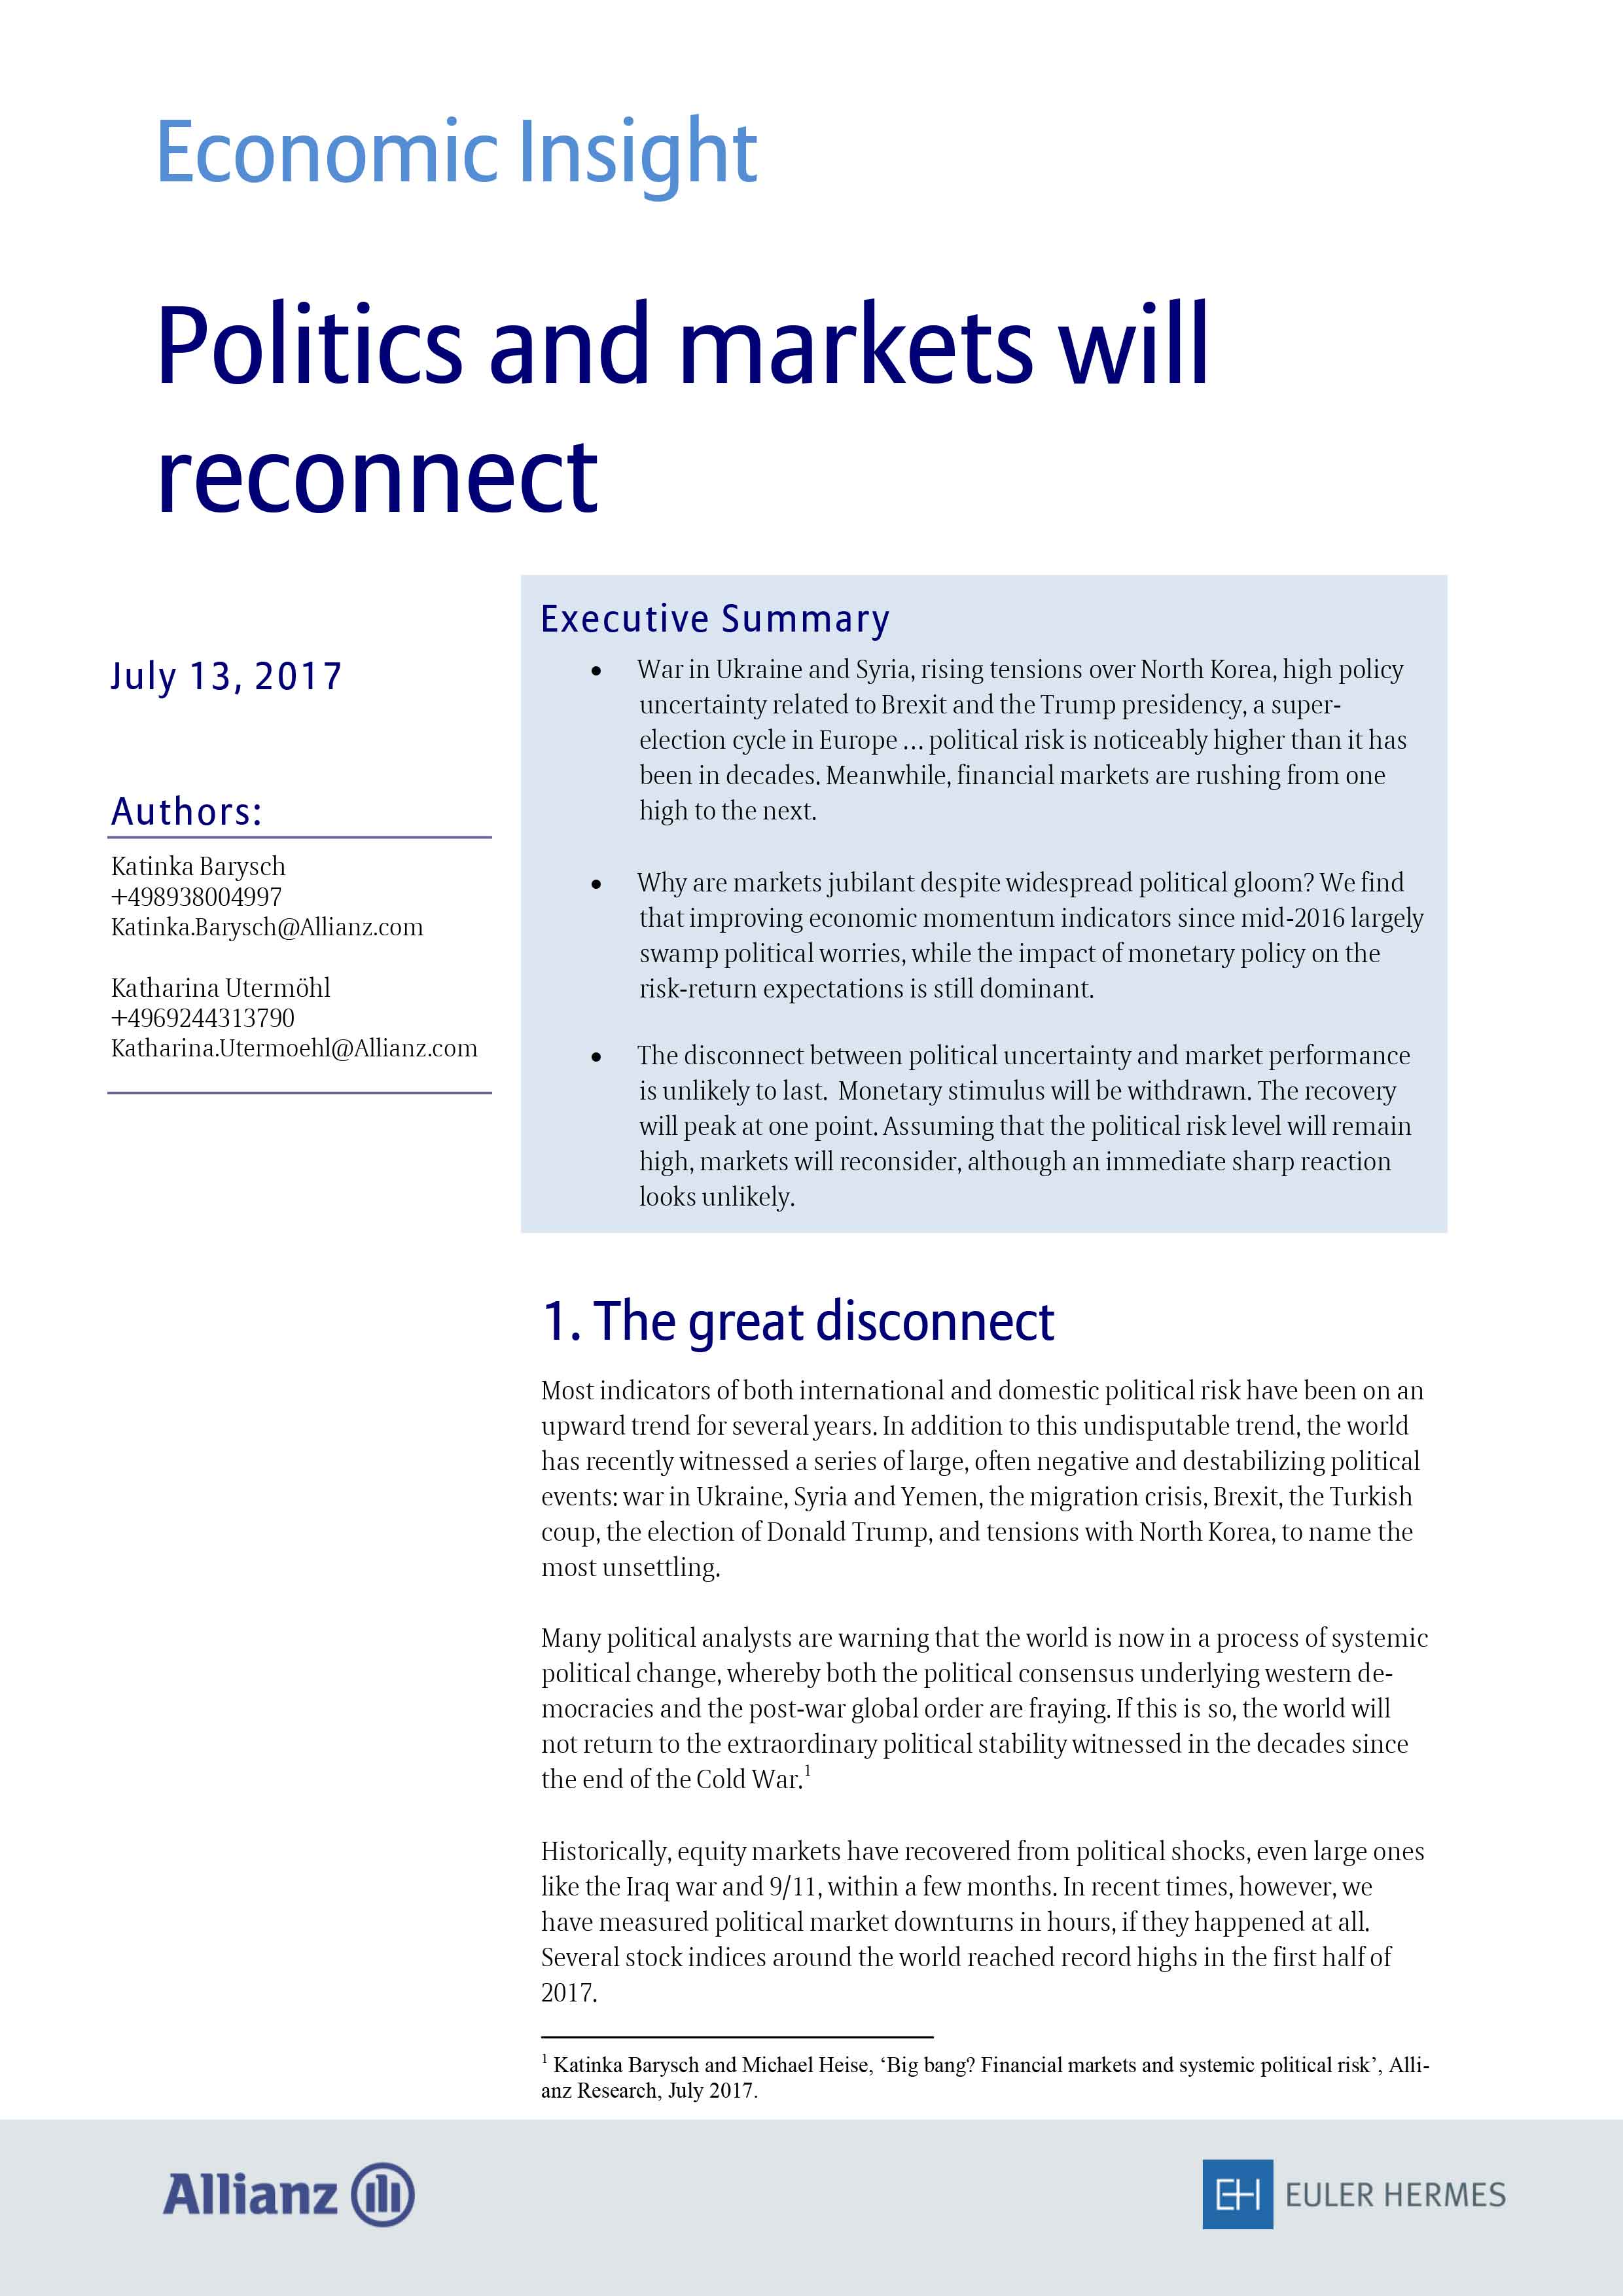 Politics and markets will reconnect